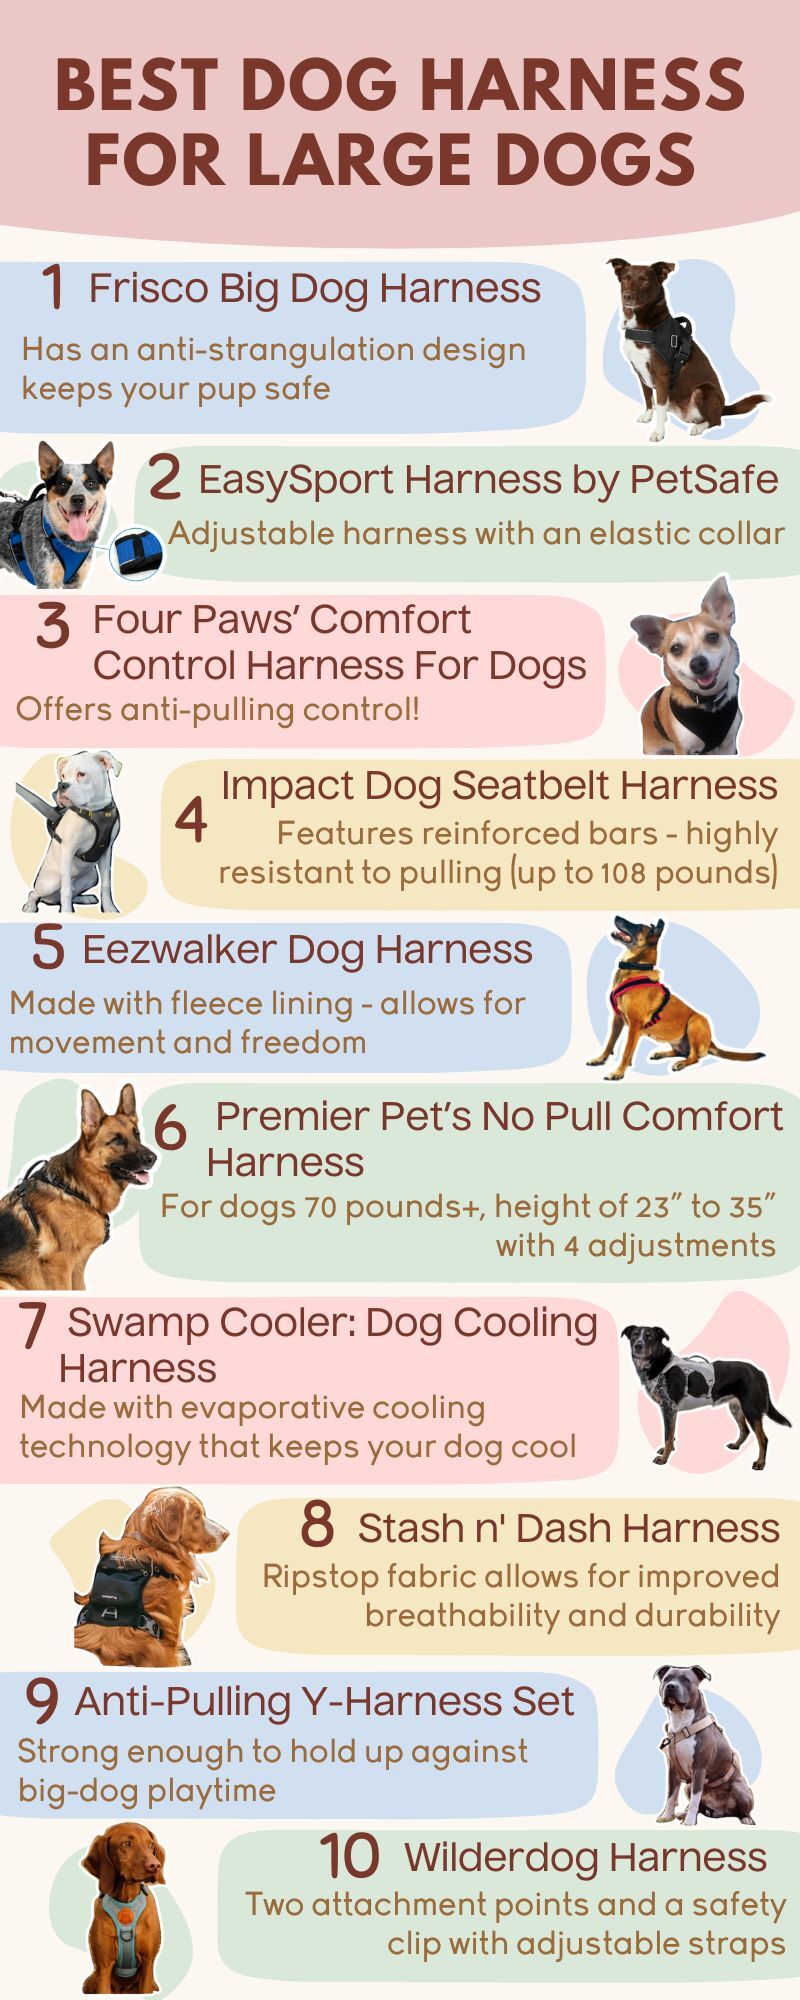 best dog harness for large dogs infographic